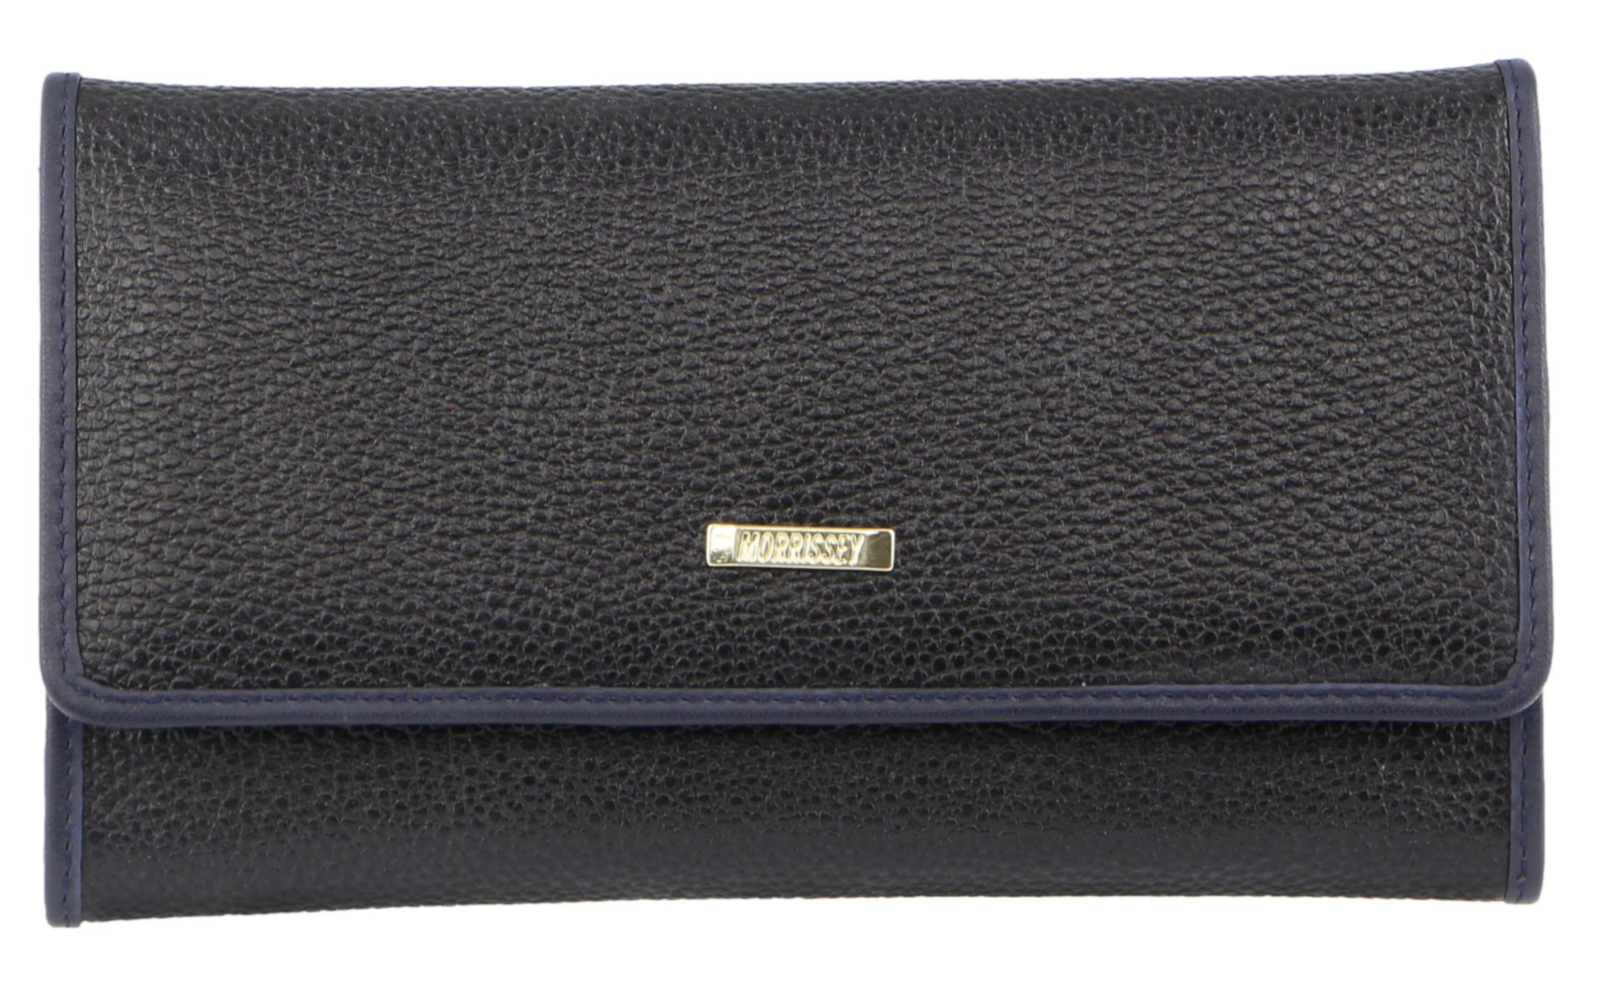 Italian Structured Leather Flap Over Ladies Wallet - Black